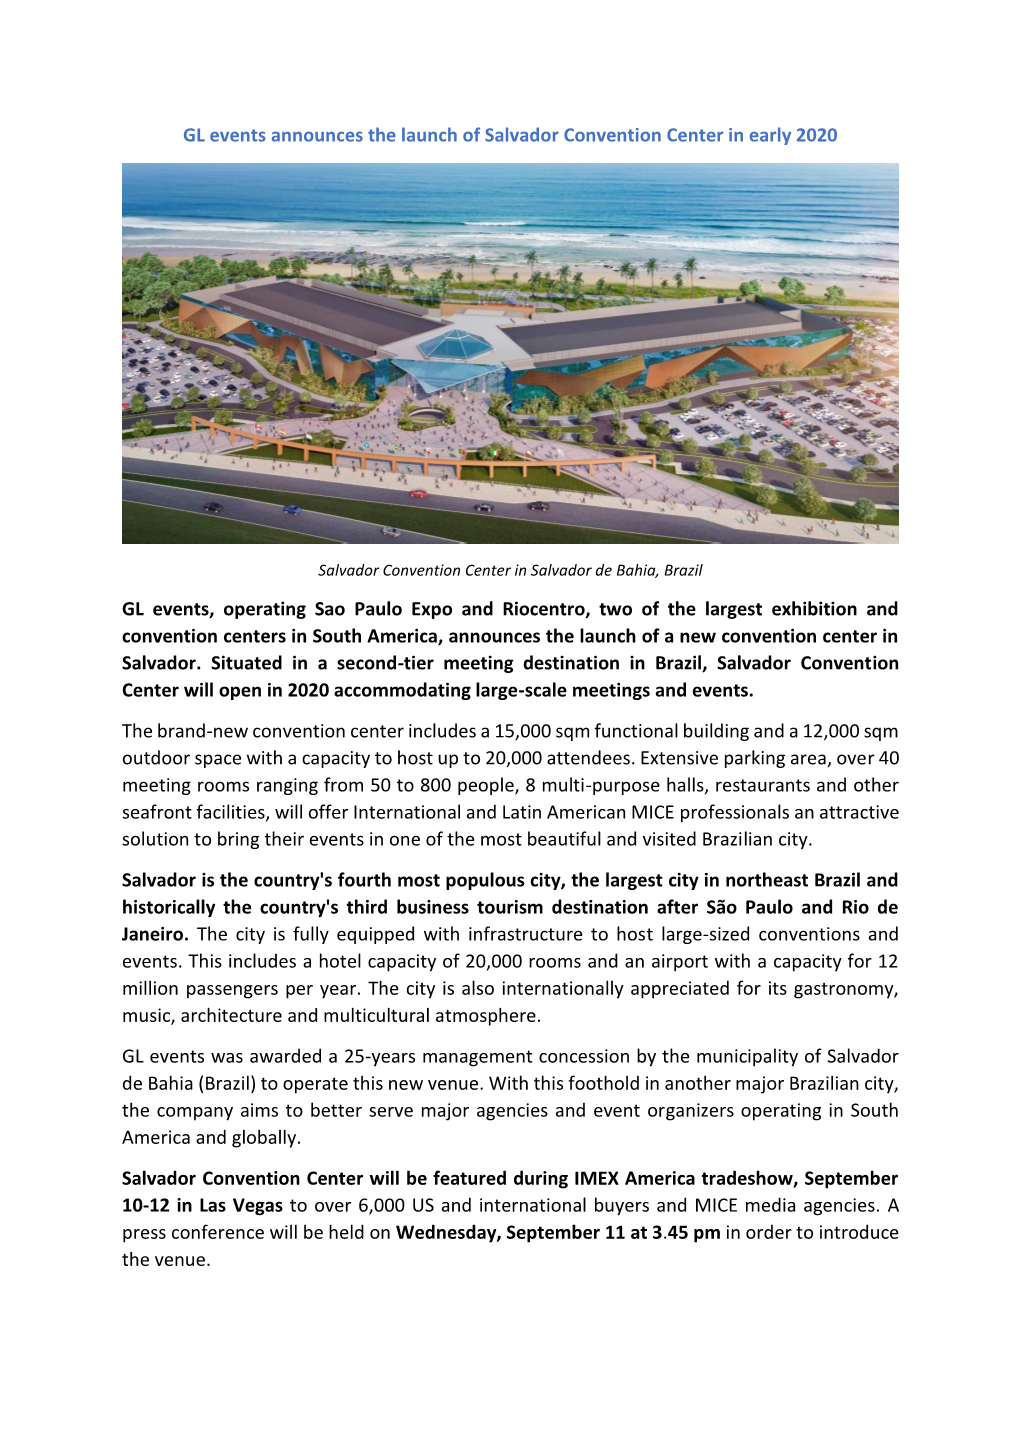 GL Events Announces the Launch of Salvador Convention Center in Early 2020